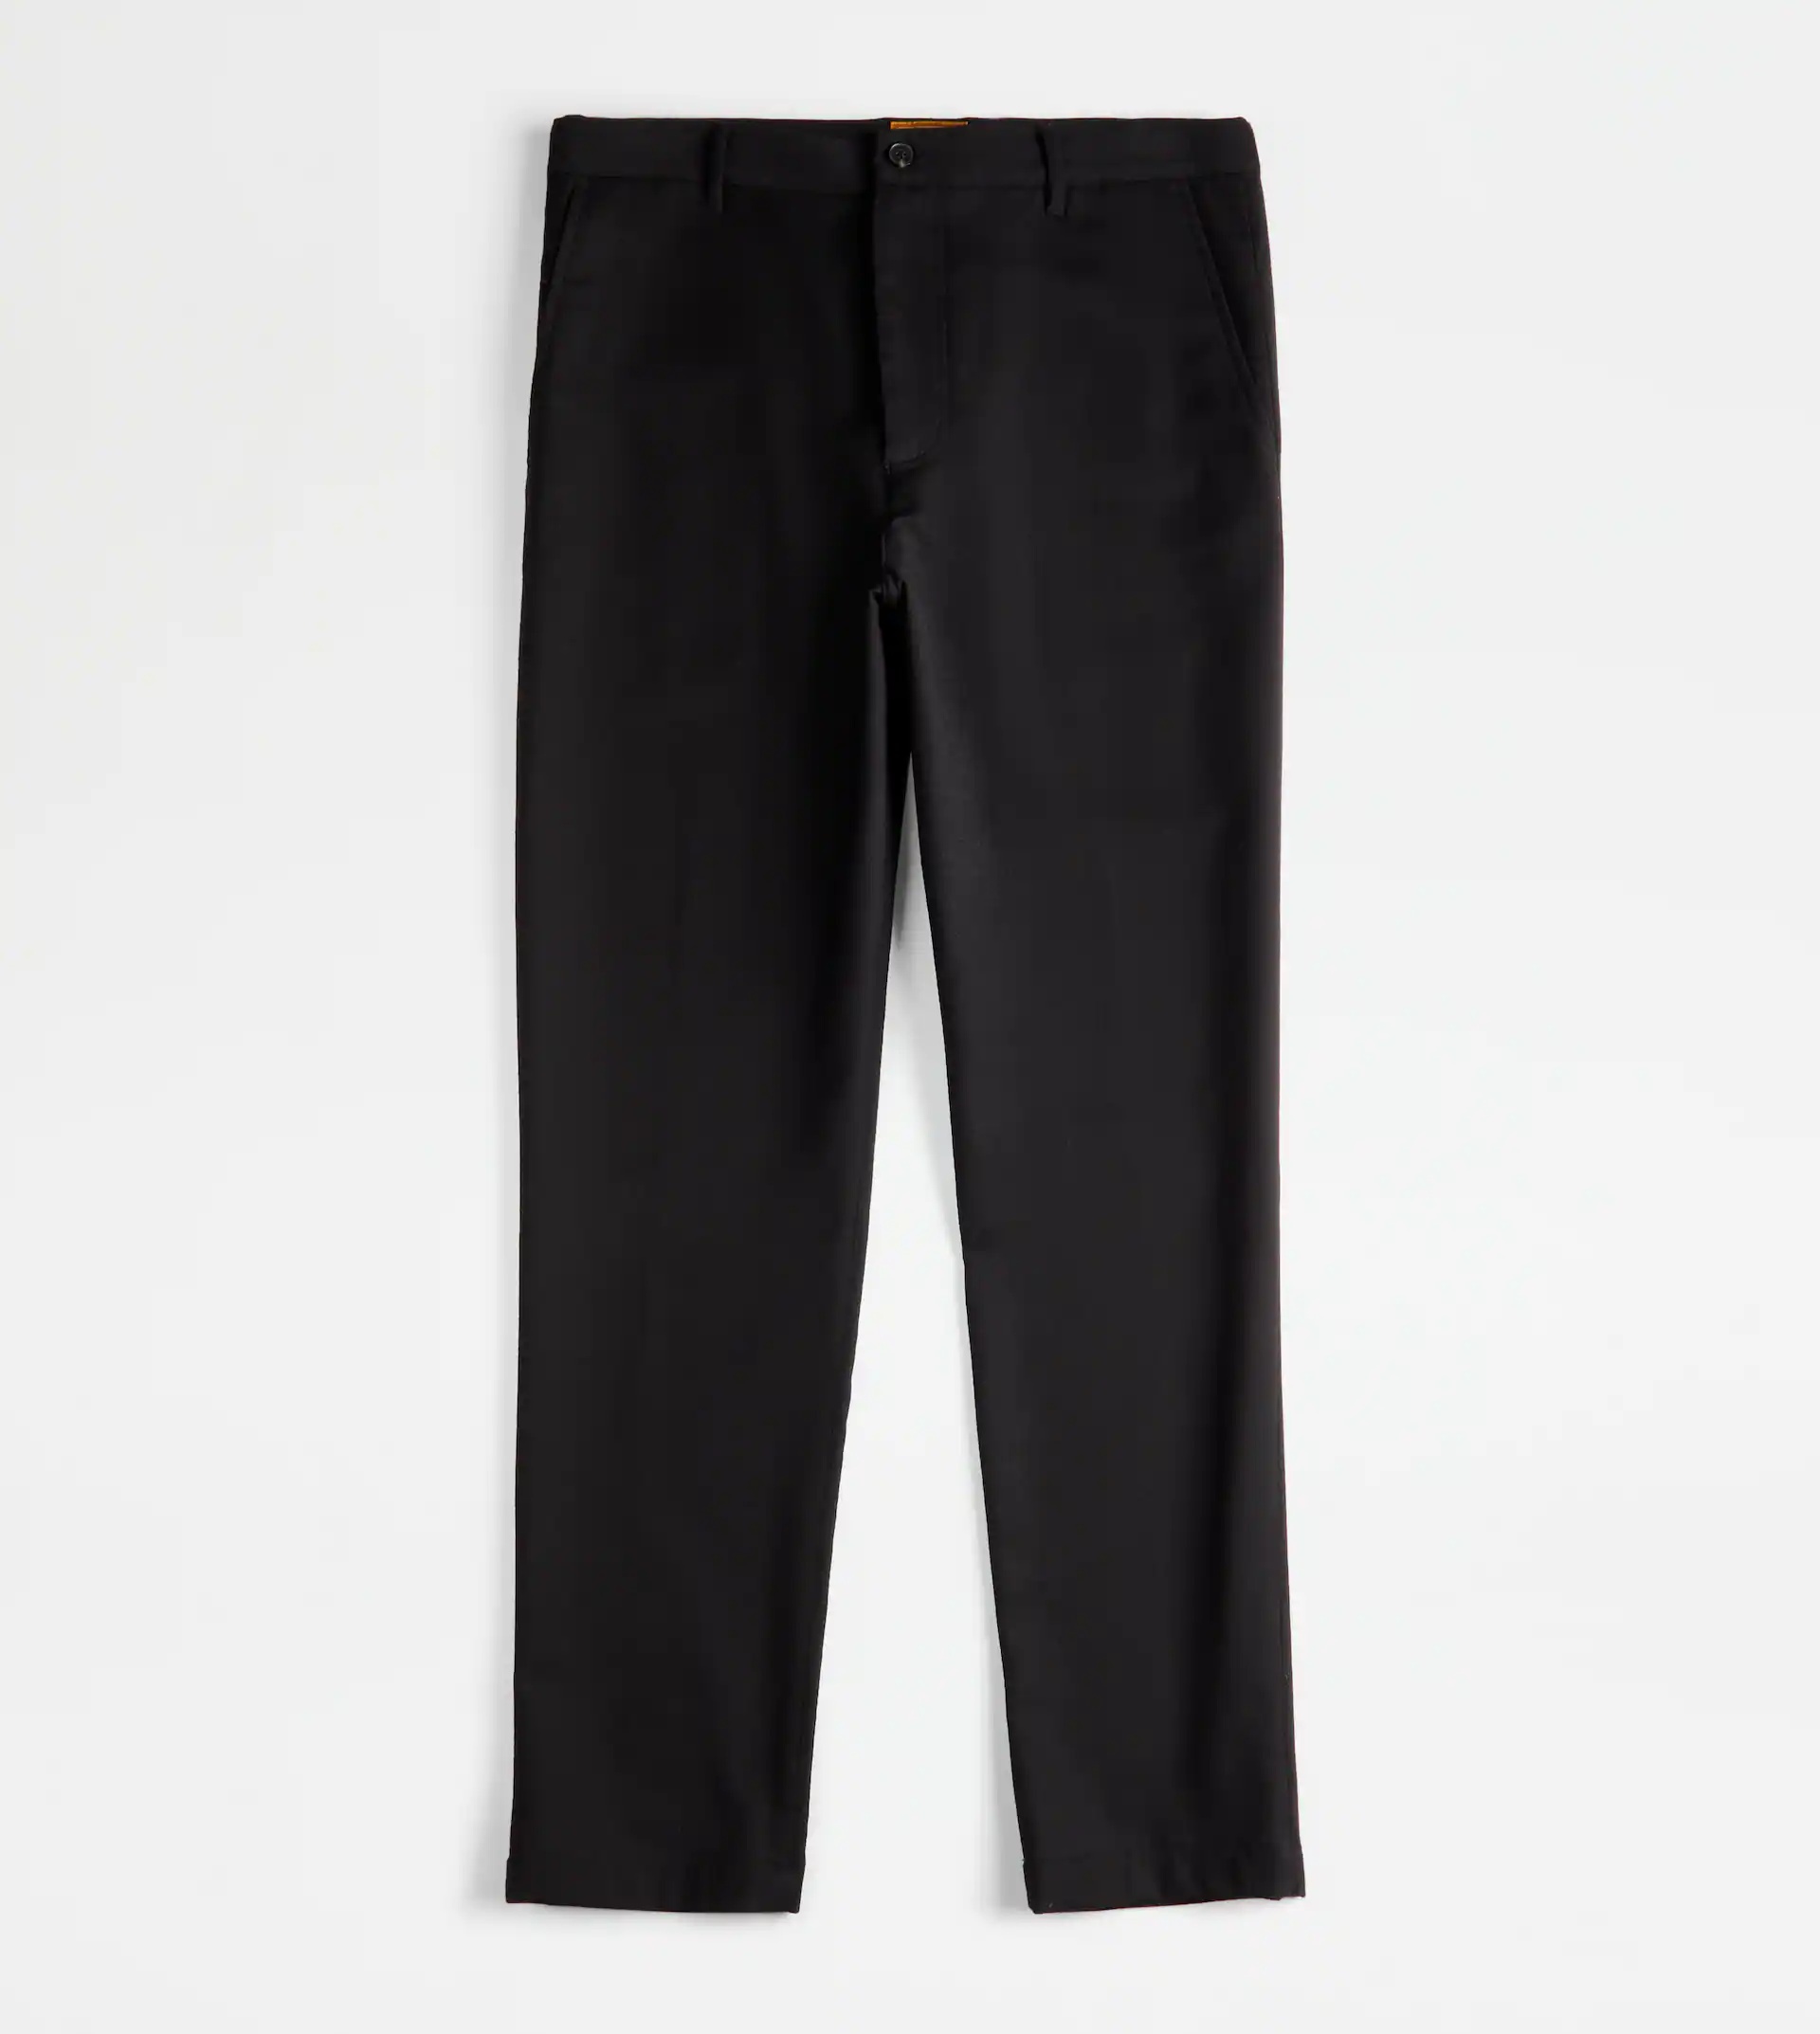 TOD'S CHINO TROUSERS ADJUSTABLE WAISTBAND - BLACK - 1